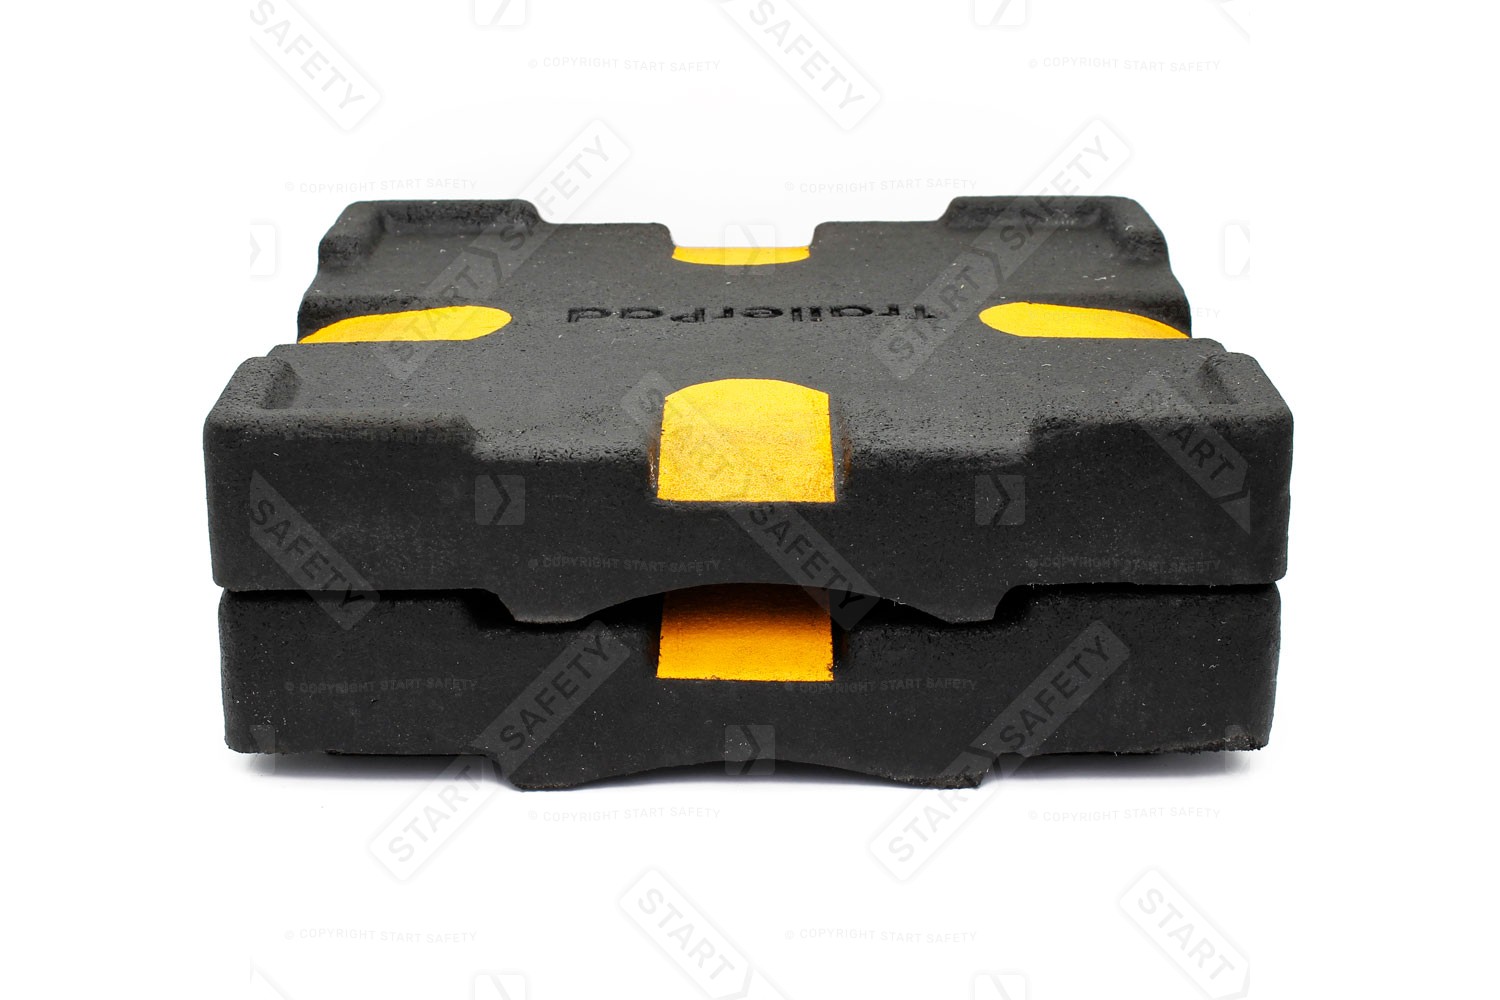 Stackable Design Of The Trailer Pad